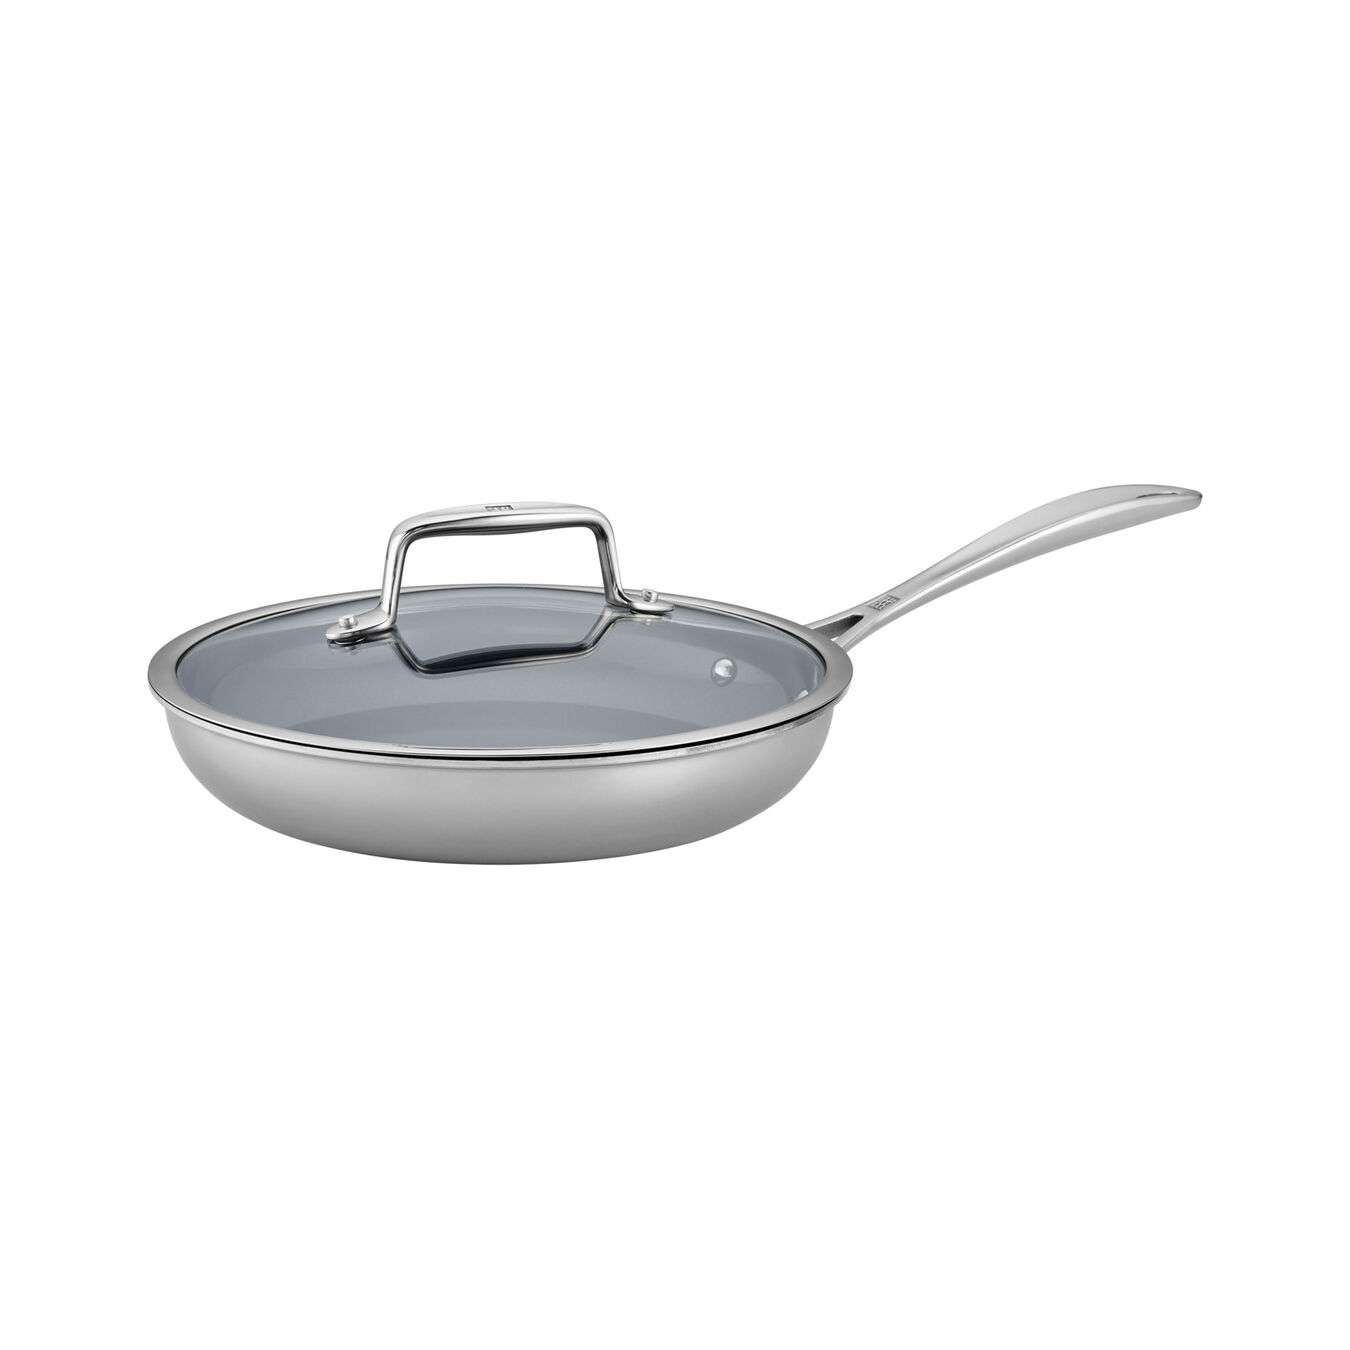 https://kitchenfantasy.com/wp-content/uploads/2022/08/2-PC-STAINLESS-STEEL-CERAMIC-NON-STICK-FRY-PAN-WITH-LID-SET.jpg